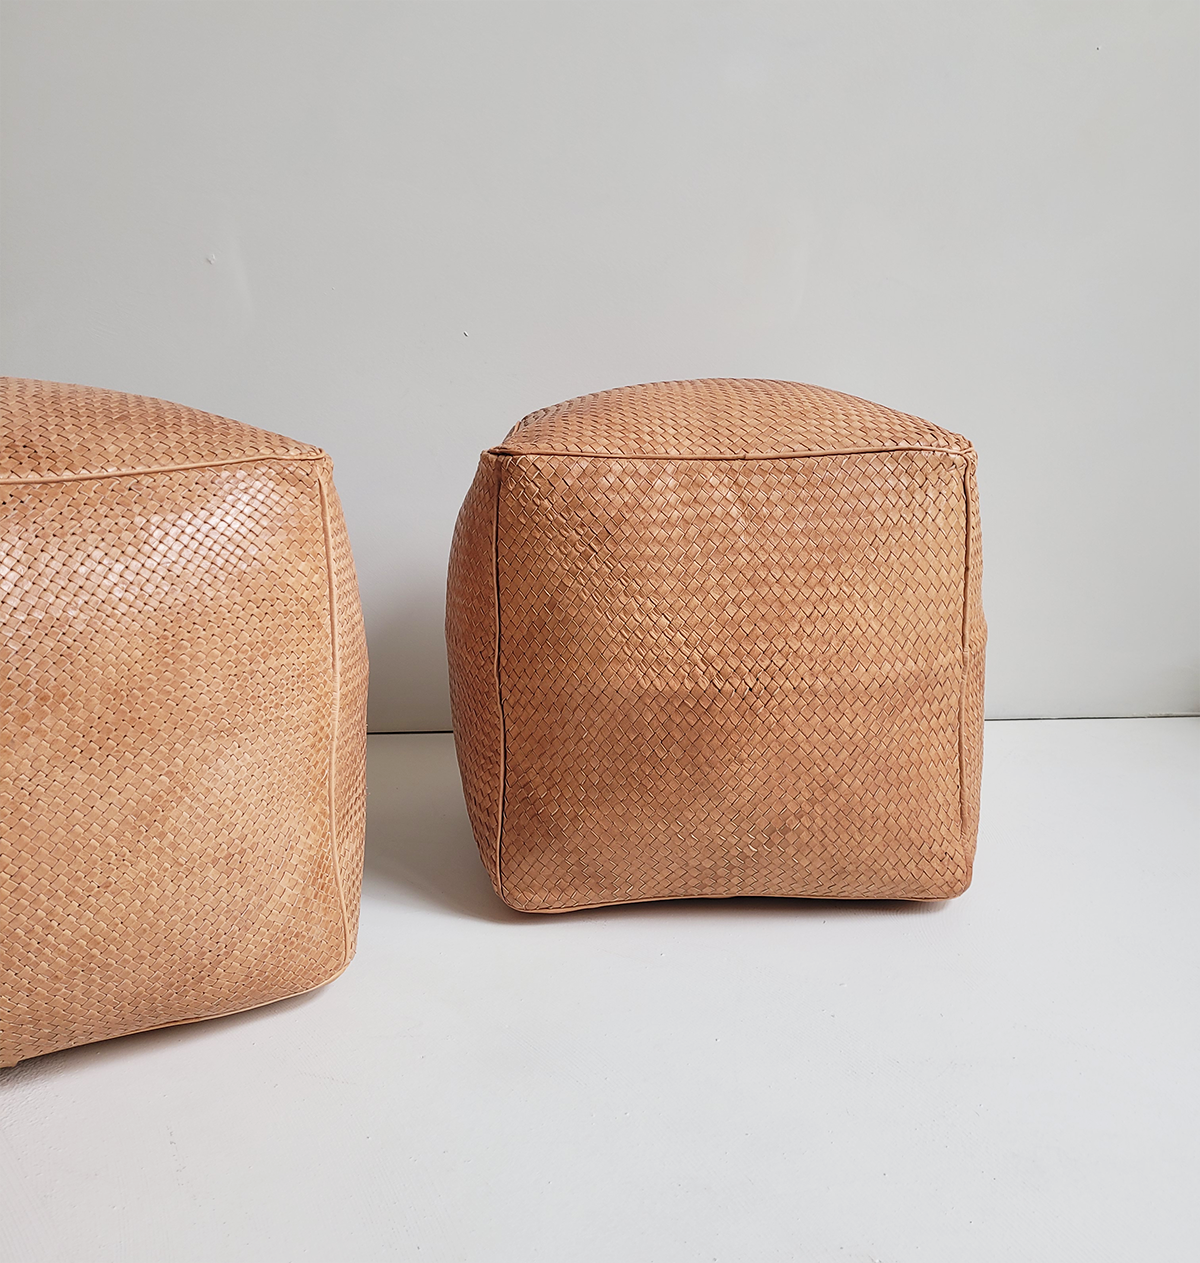 Braided Leather Cube Pouf